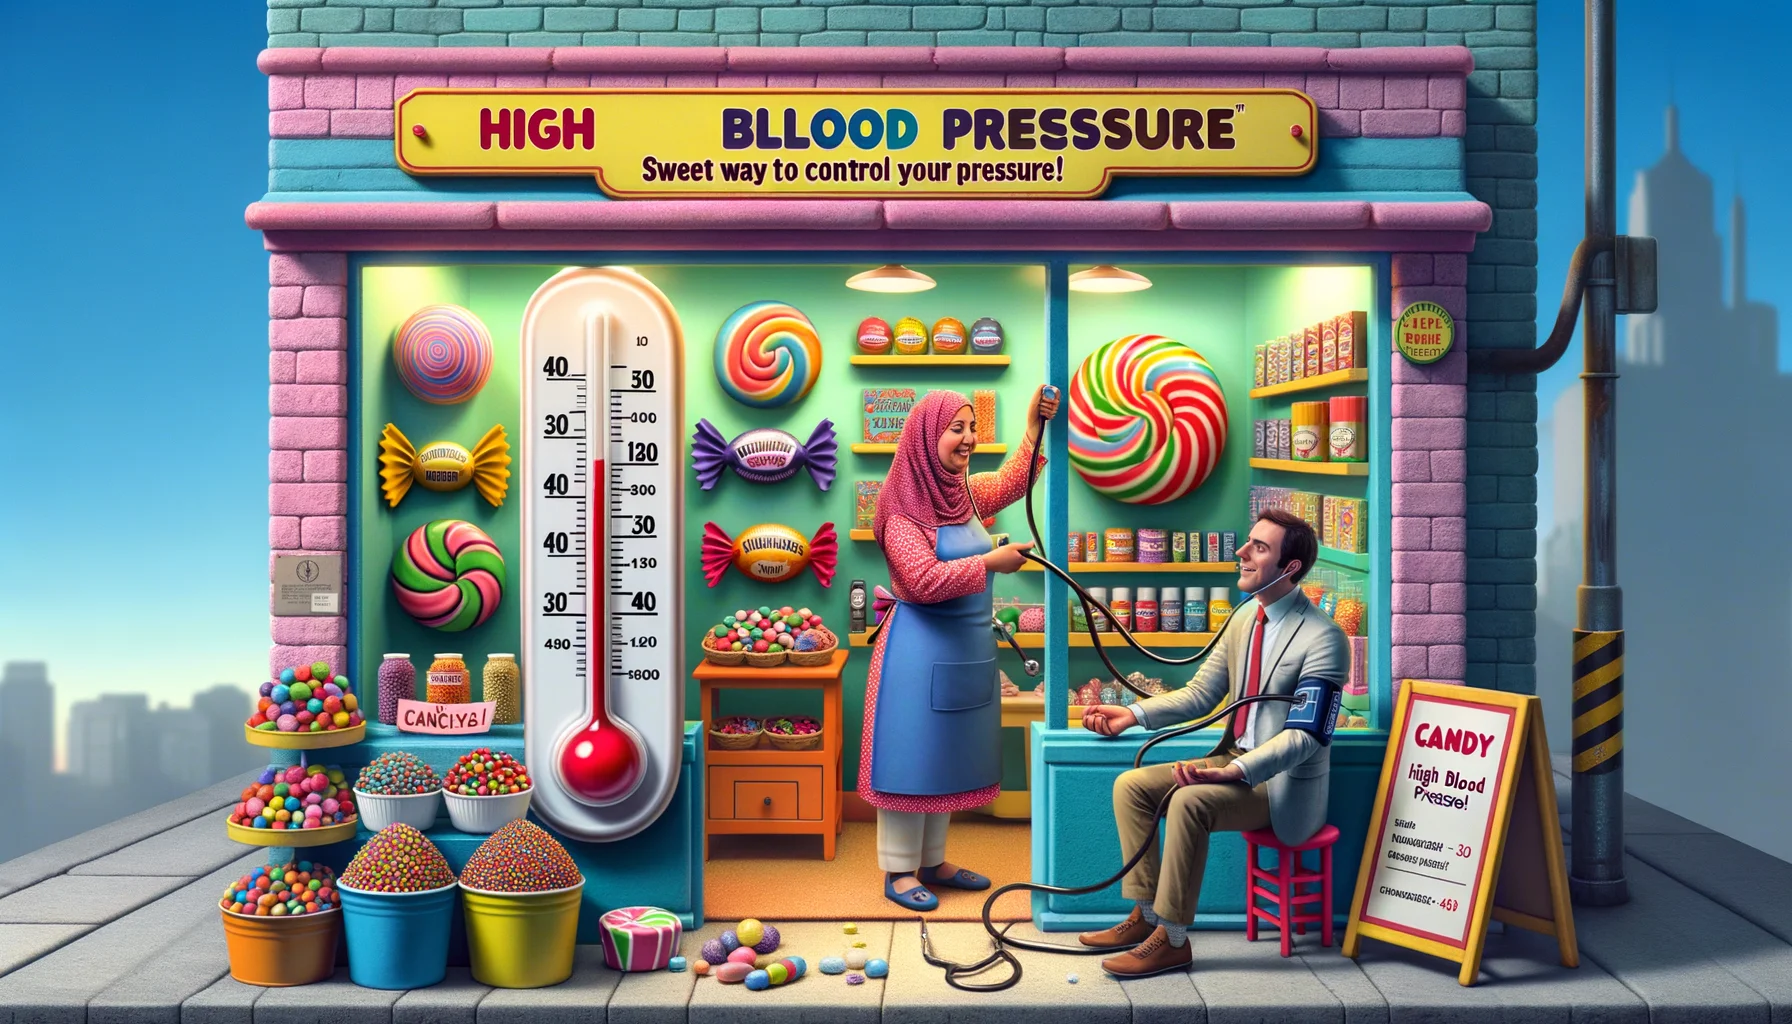 Create a humorous yet believable image illustrating the concept of 'Candy for High Blood Pressure Management'. Picture this: A small, vibrant candy shop owned by an ethnically Middle Eastern woman, filled with colorful candies labeled with playful medical terminologies. In the center, a life-size candy thermometer displays different 'pressure levels' and a Caucasian man is humorously using it to 'measure' his blood pressure after eating a piece of candy. A signage cleverly placed in the background reads, 'Sweet Way to Control Your Pressure!' capturing the whimsical nature of the scene.